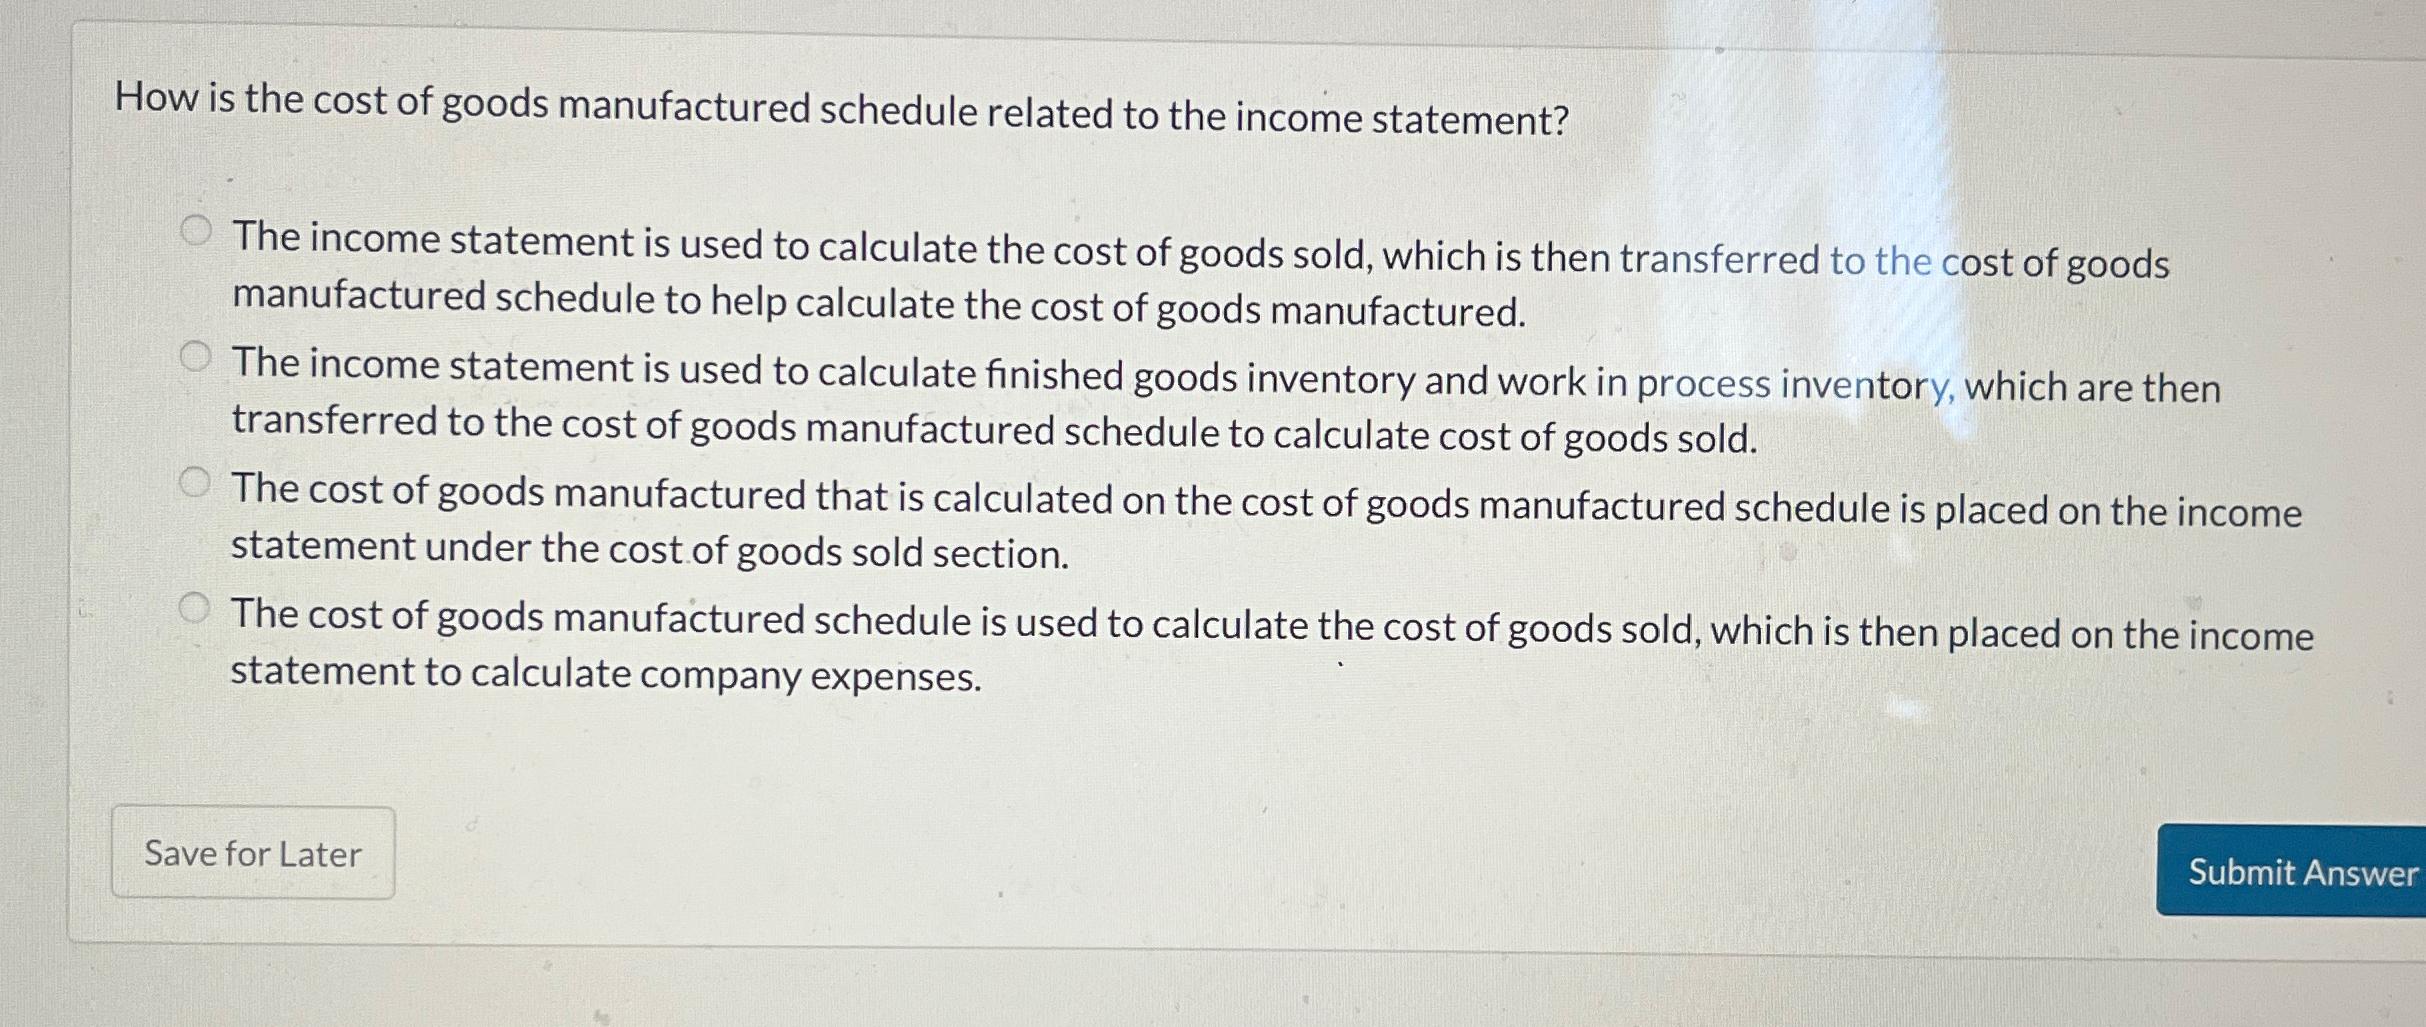 How is the cost of goods manufactured schedule related to the income statement? The income statement is used